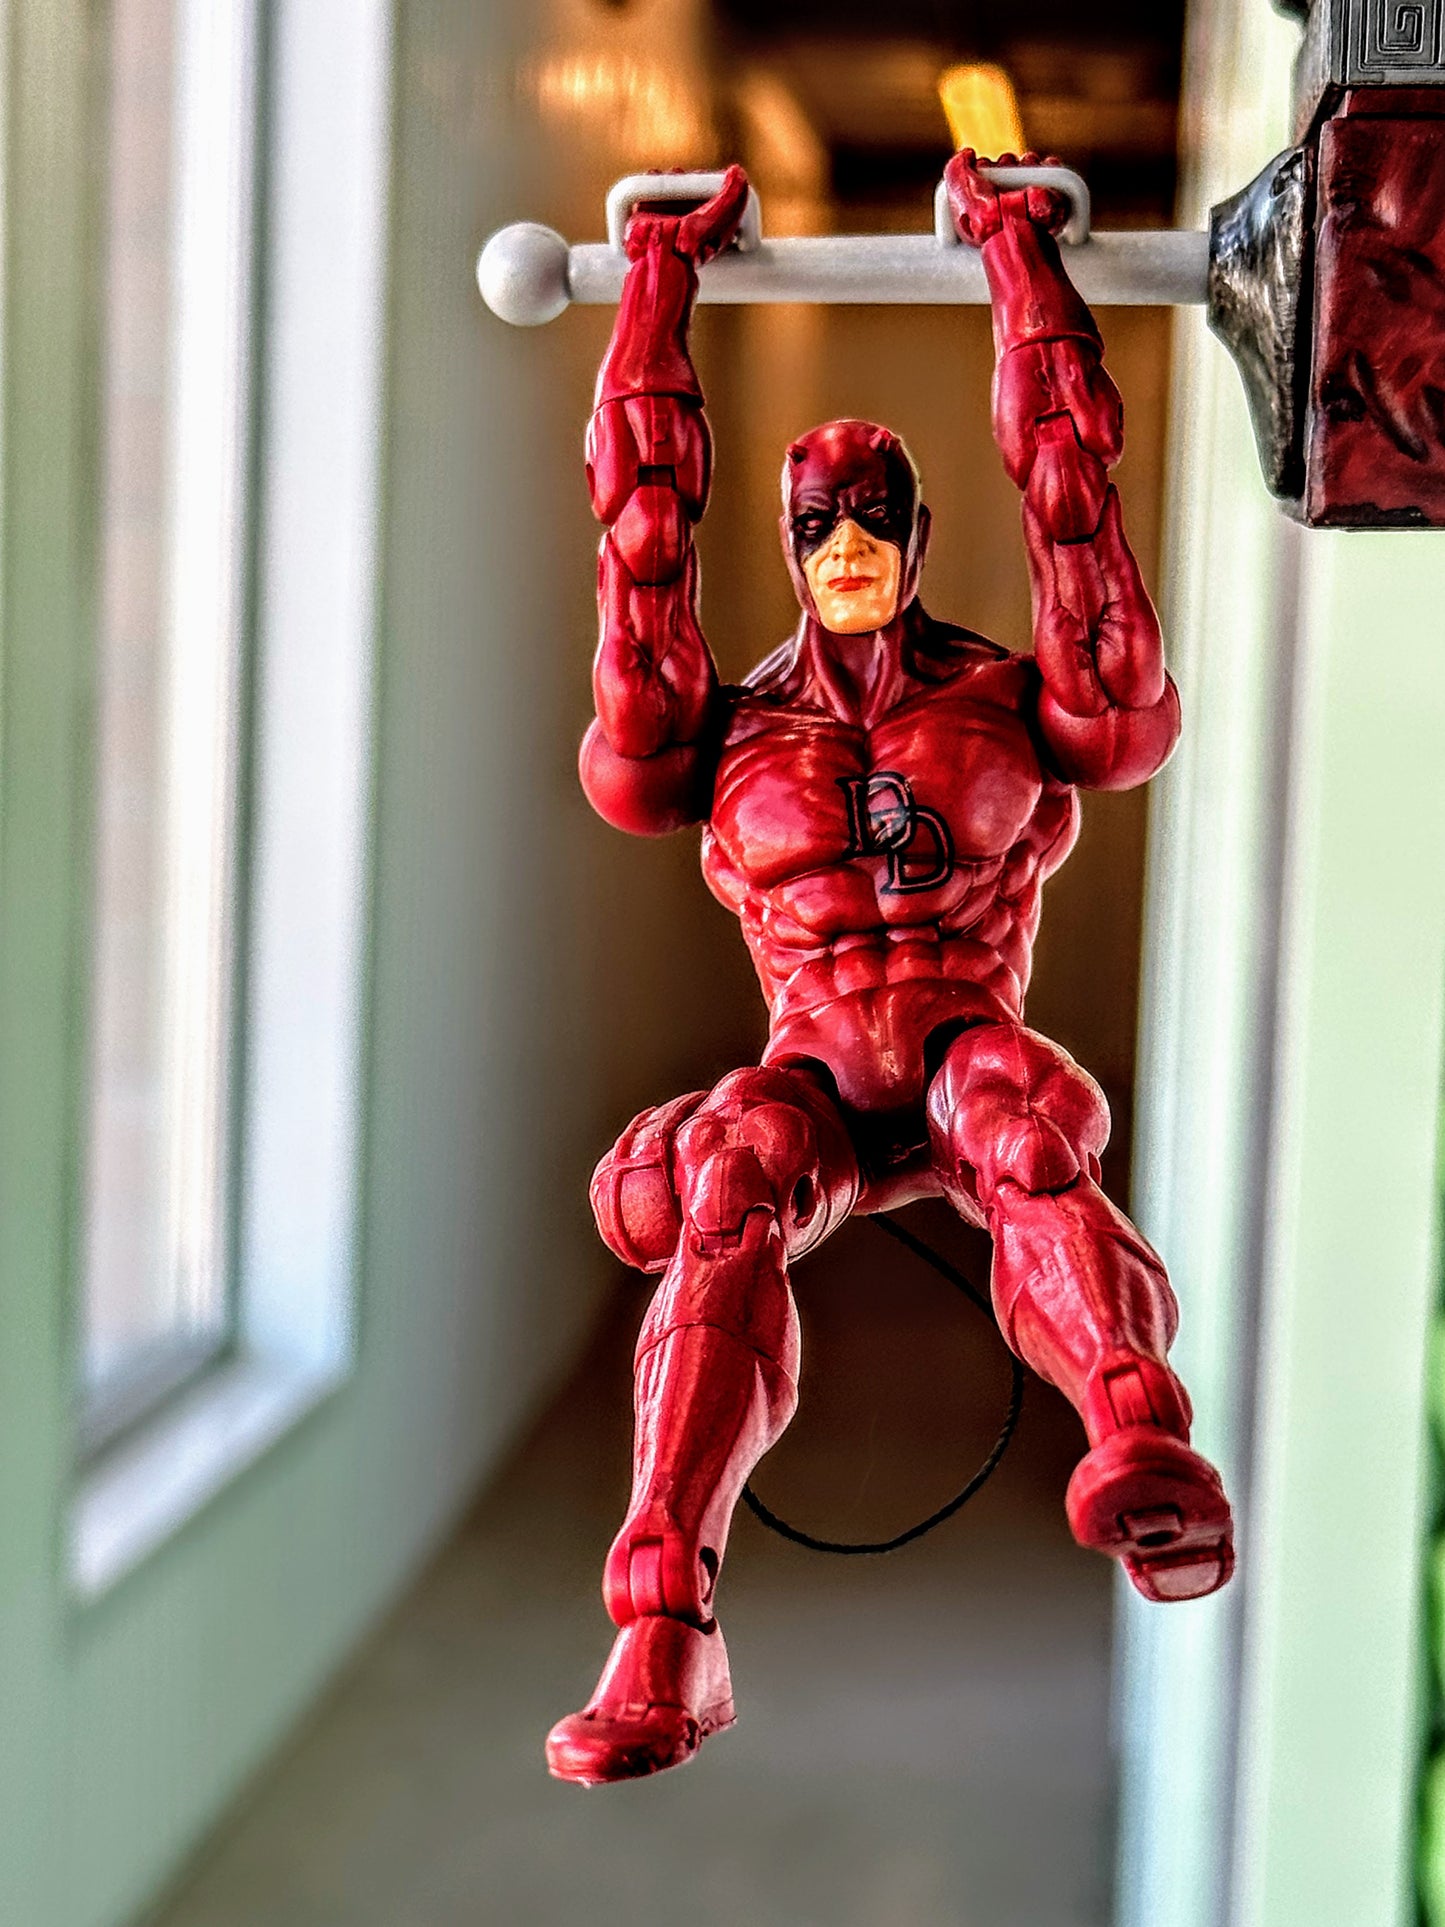 Daredevil with Swing 'n Spin Action